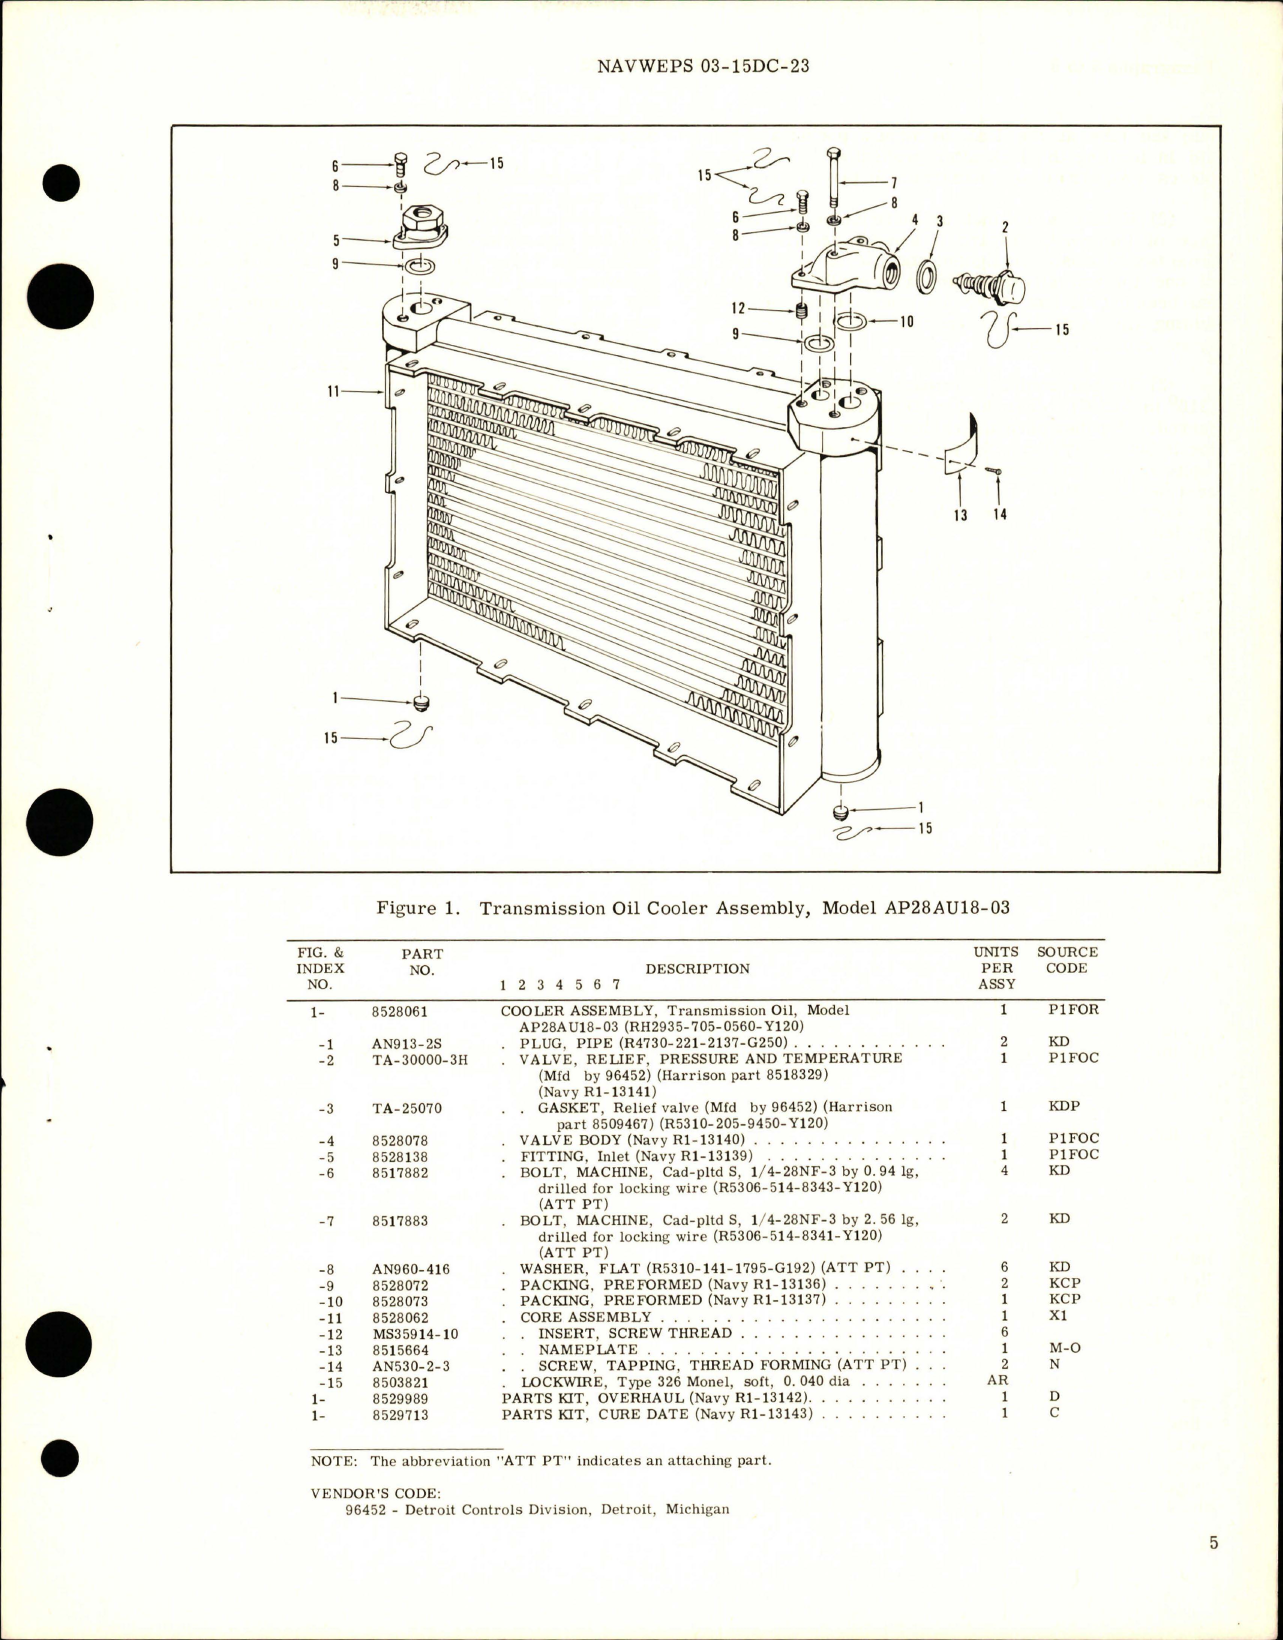 Sample page 5 from AirCorps Library document: Overhaul Instructions with Parts Breakdown for Transmission Oil Cooler Assembly - Model AP28AU18-03 - Part 8528061